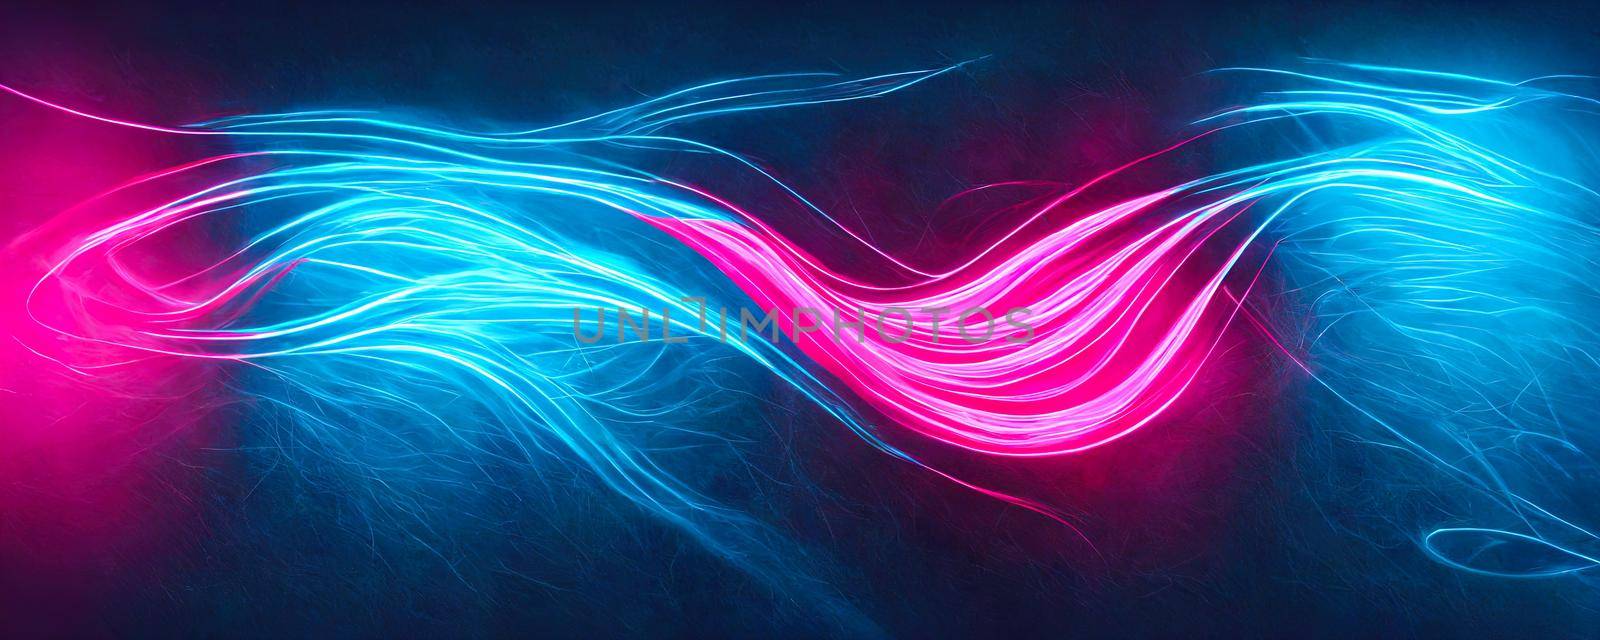 digital technology in the form of neon rays of blue and pink color, Colorful abstract wallpaper texture background illustration by TRMK